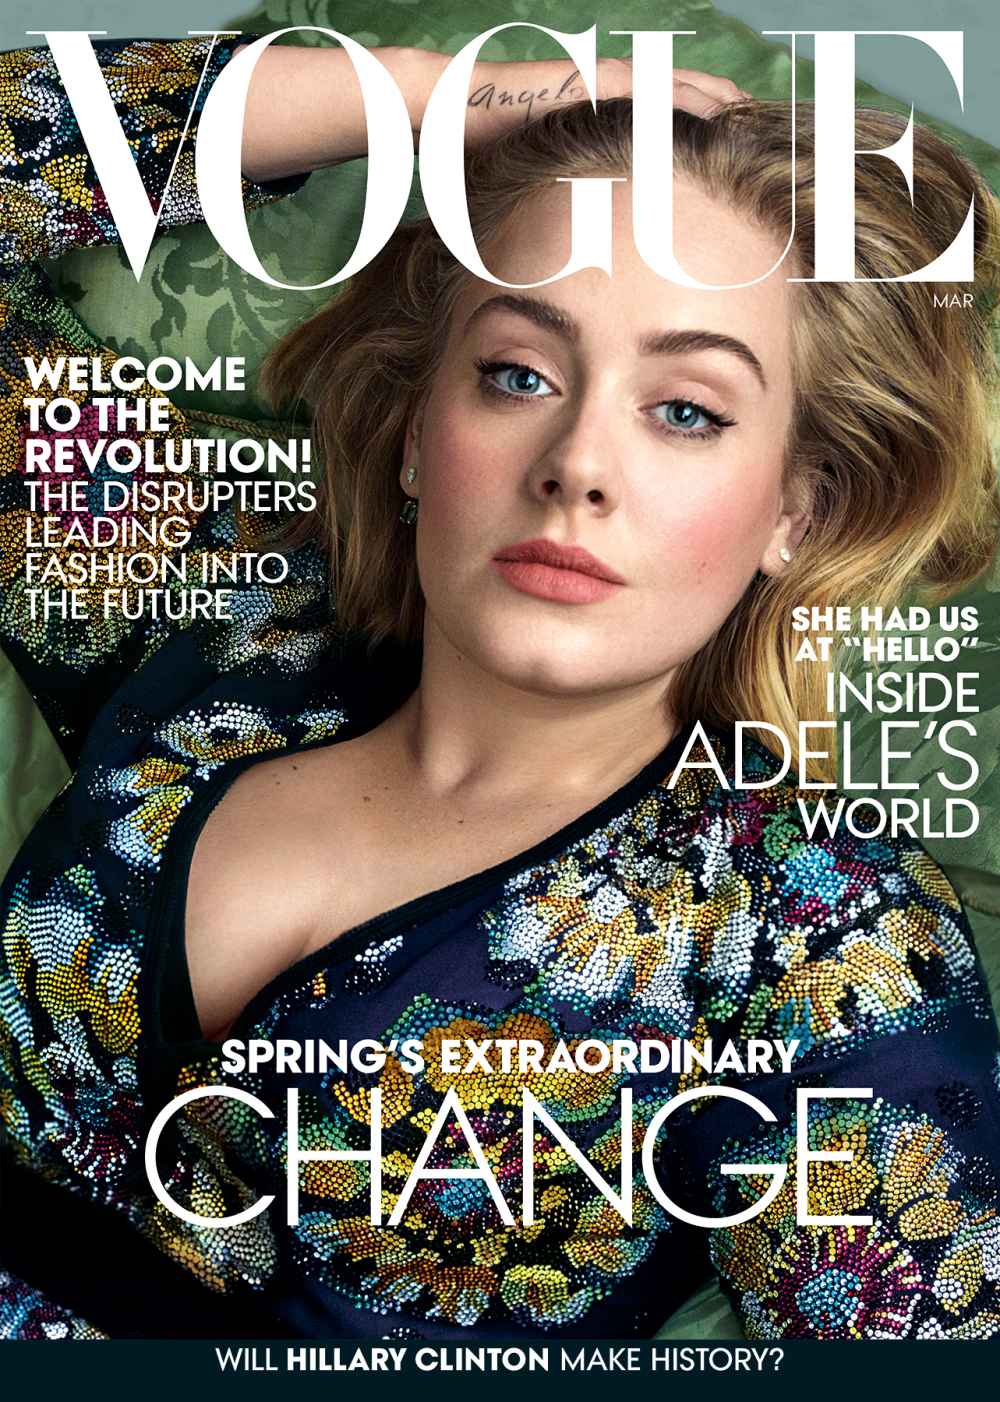 Adele for Vogue